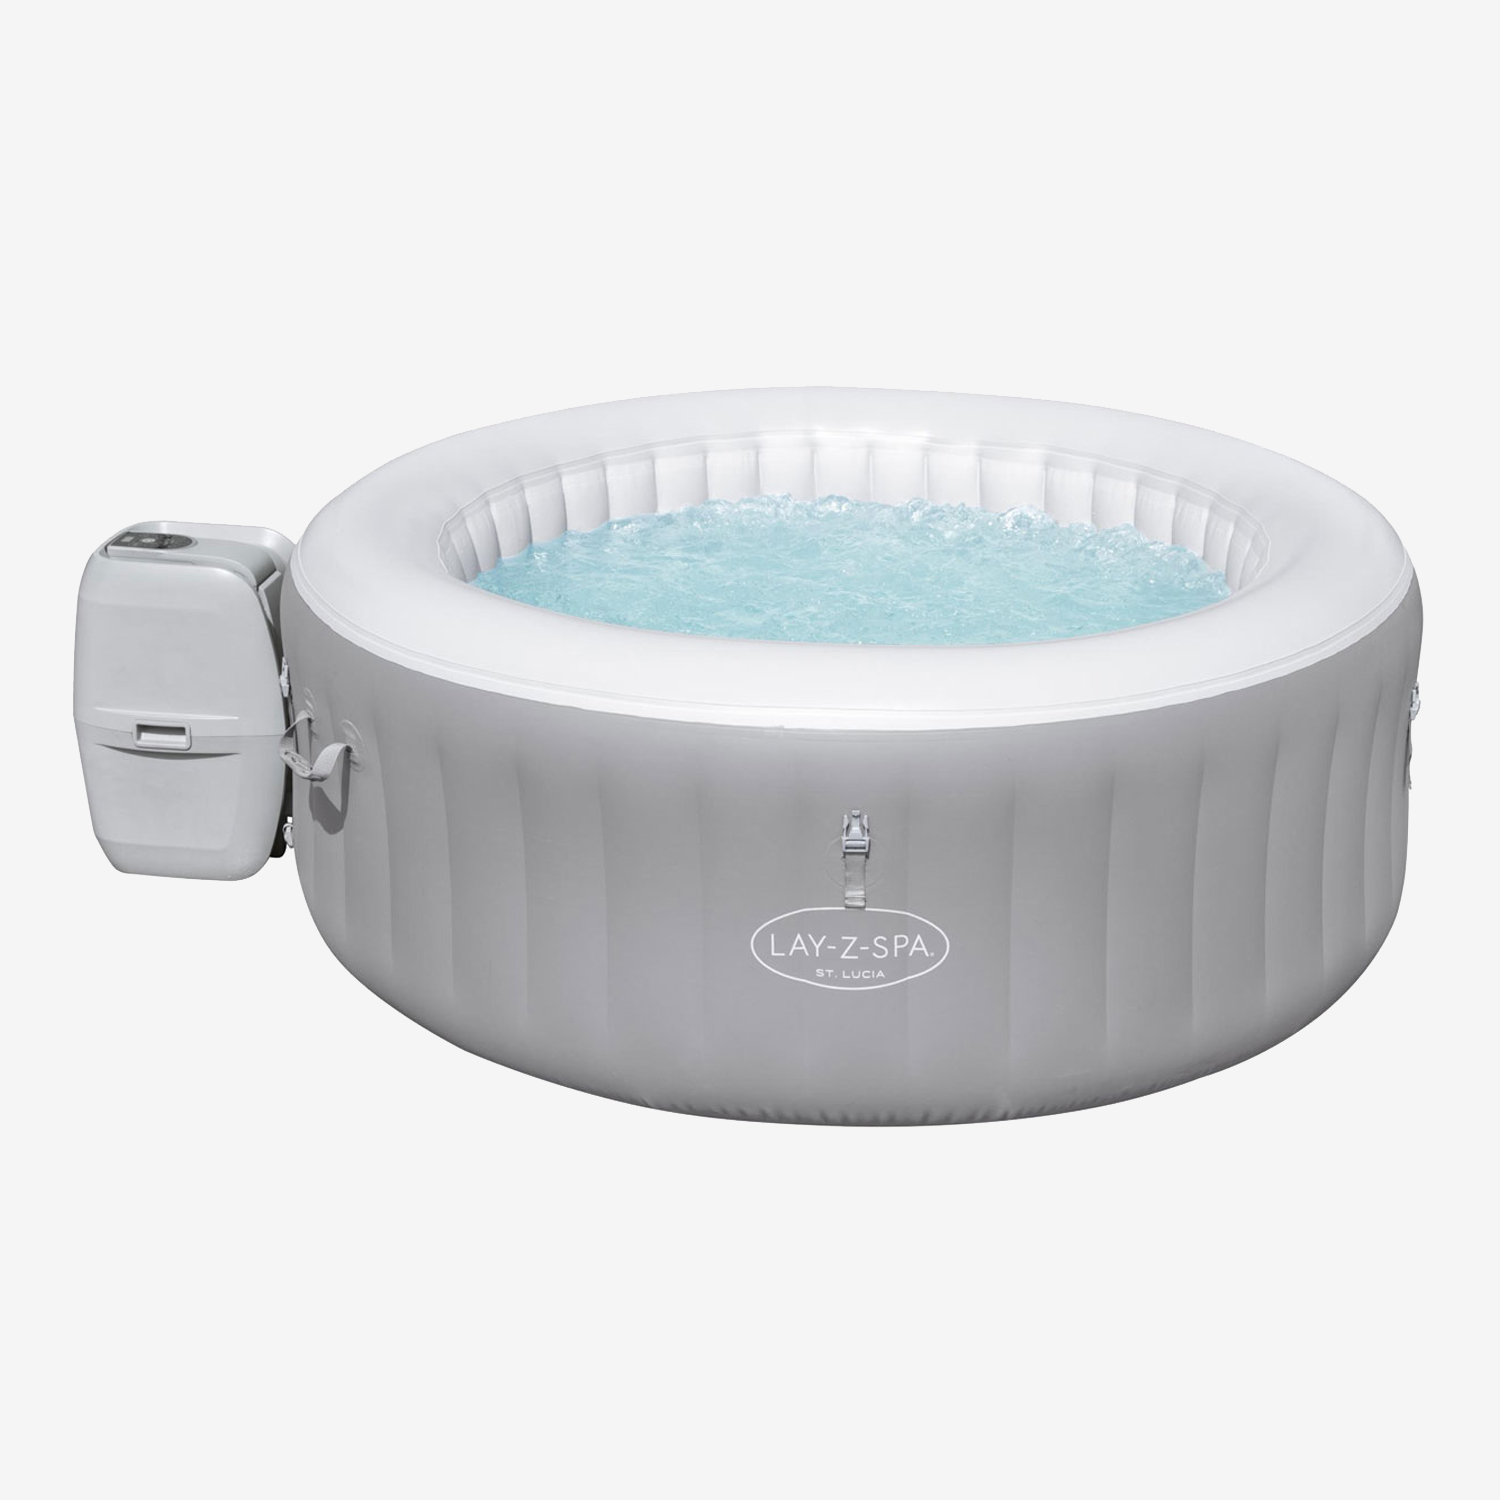 Spa Hinchable Bestway Lay-z-spa St Lucia 3 Personas